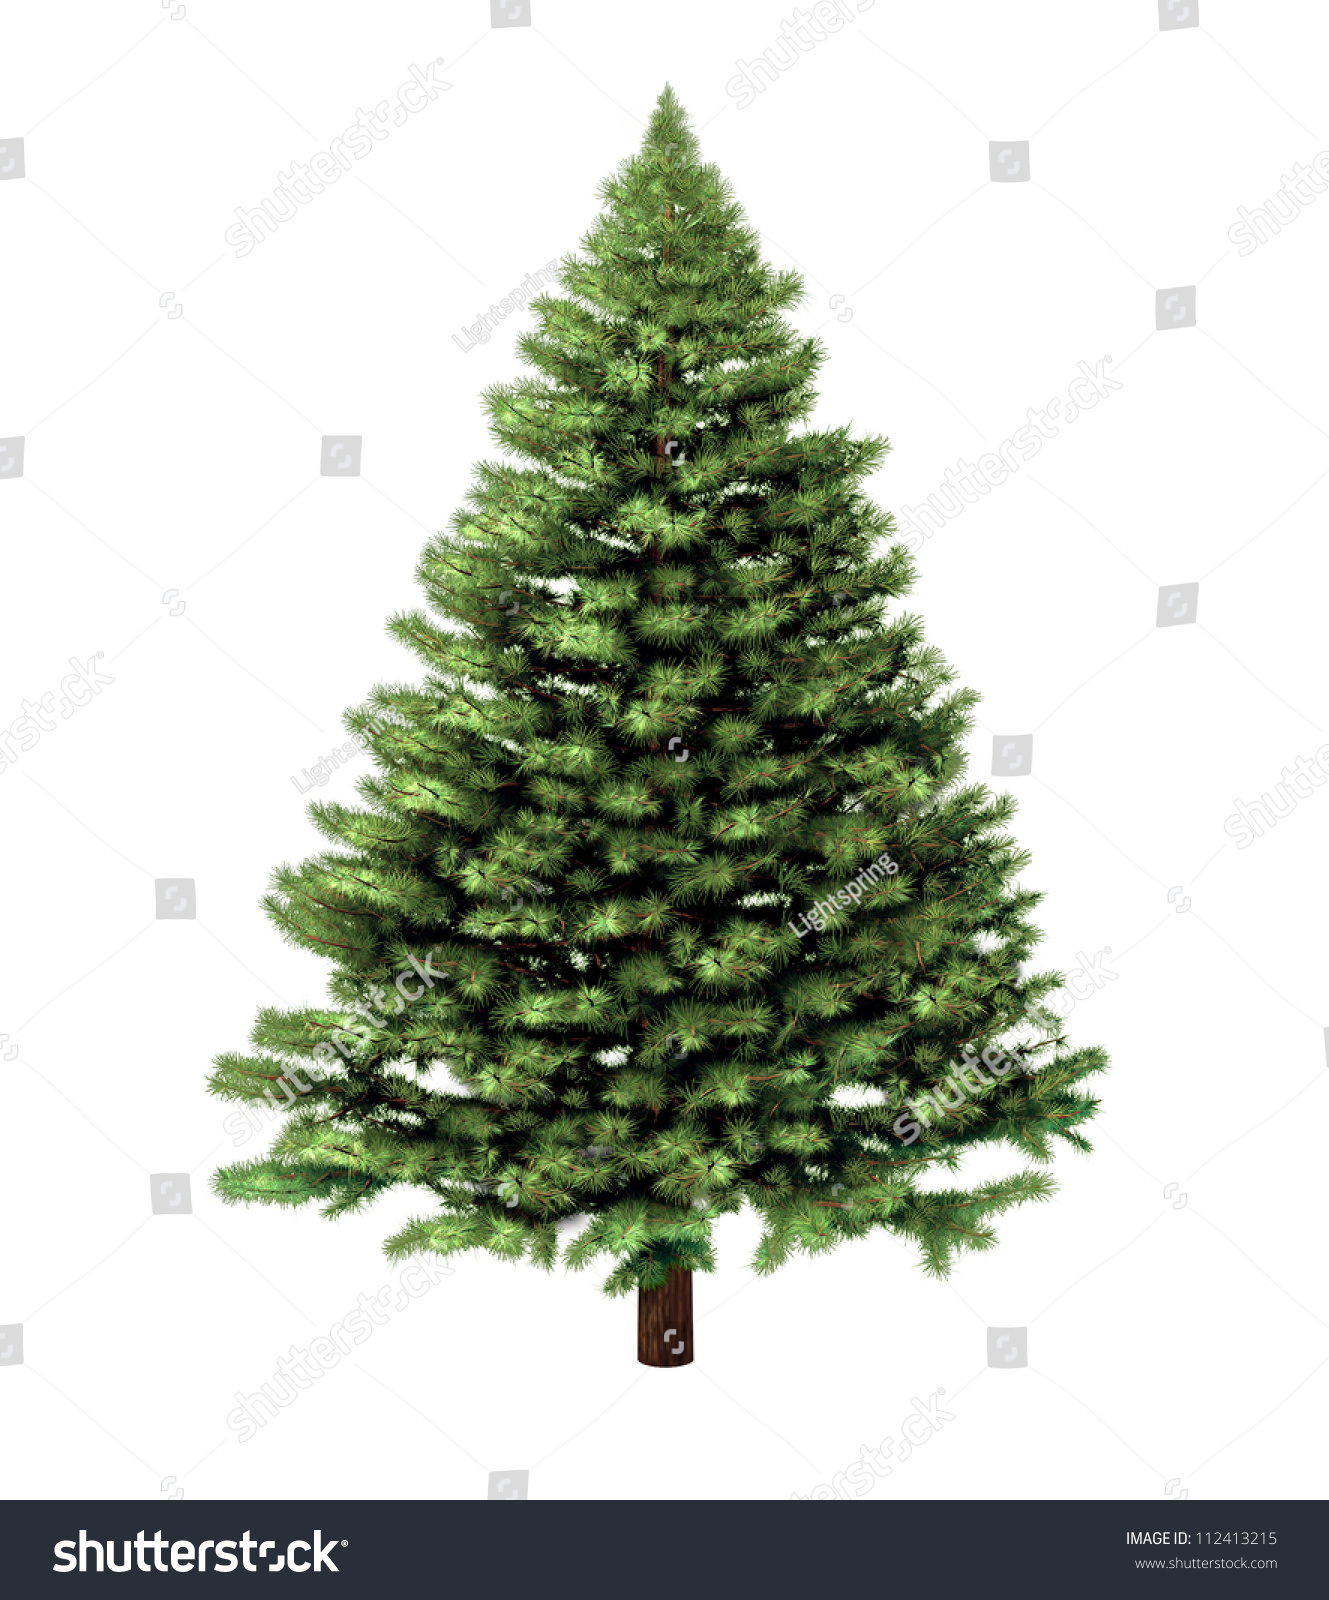 Christmas Tree Isolated On A White Background Without Any Decorations As A Festive Evergreen ...